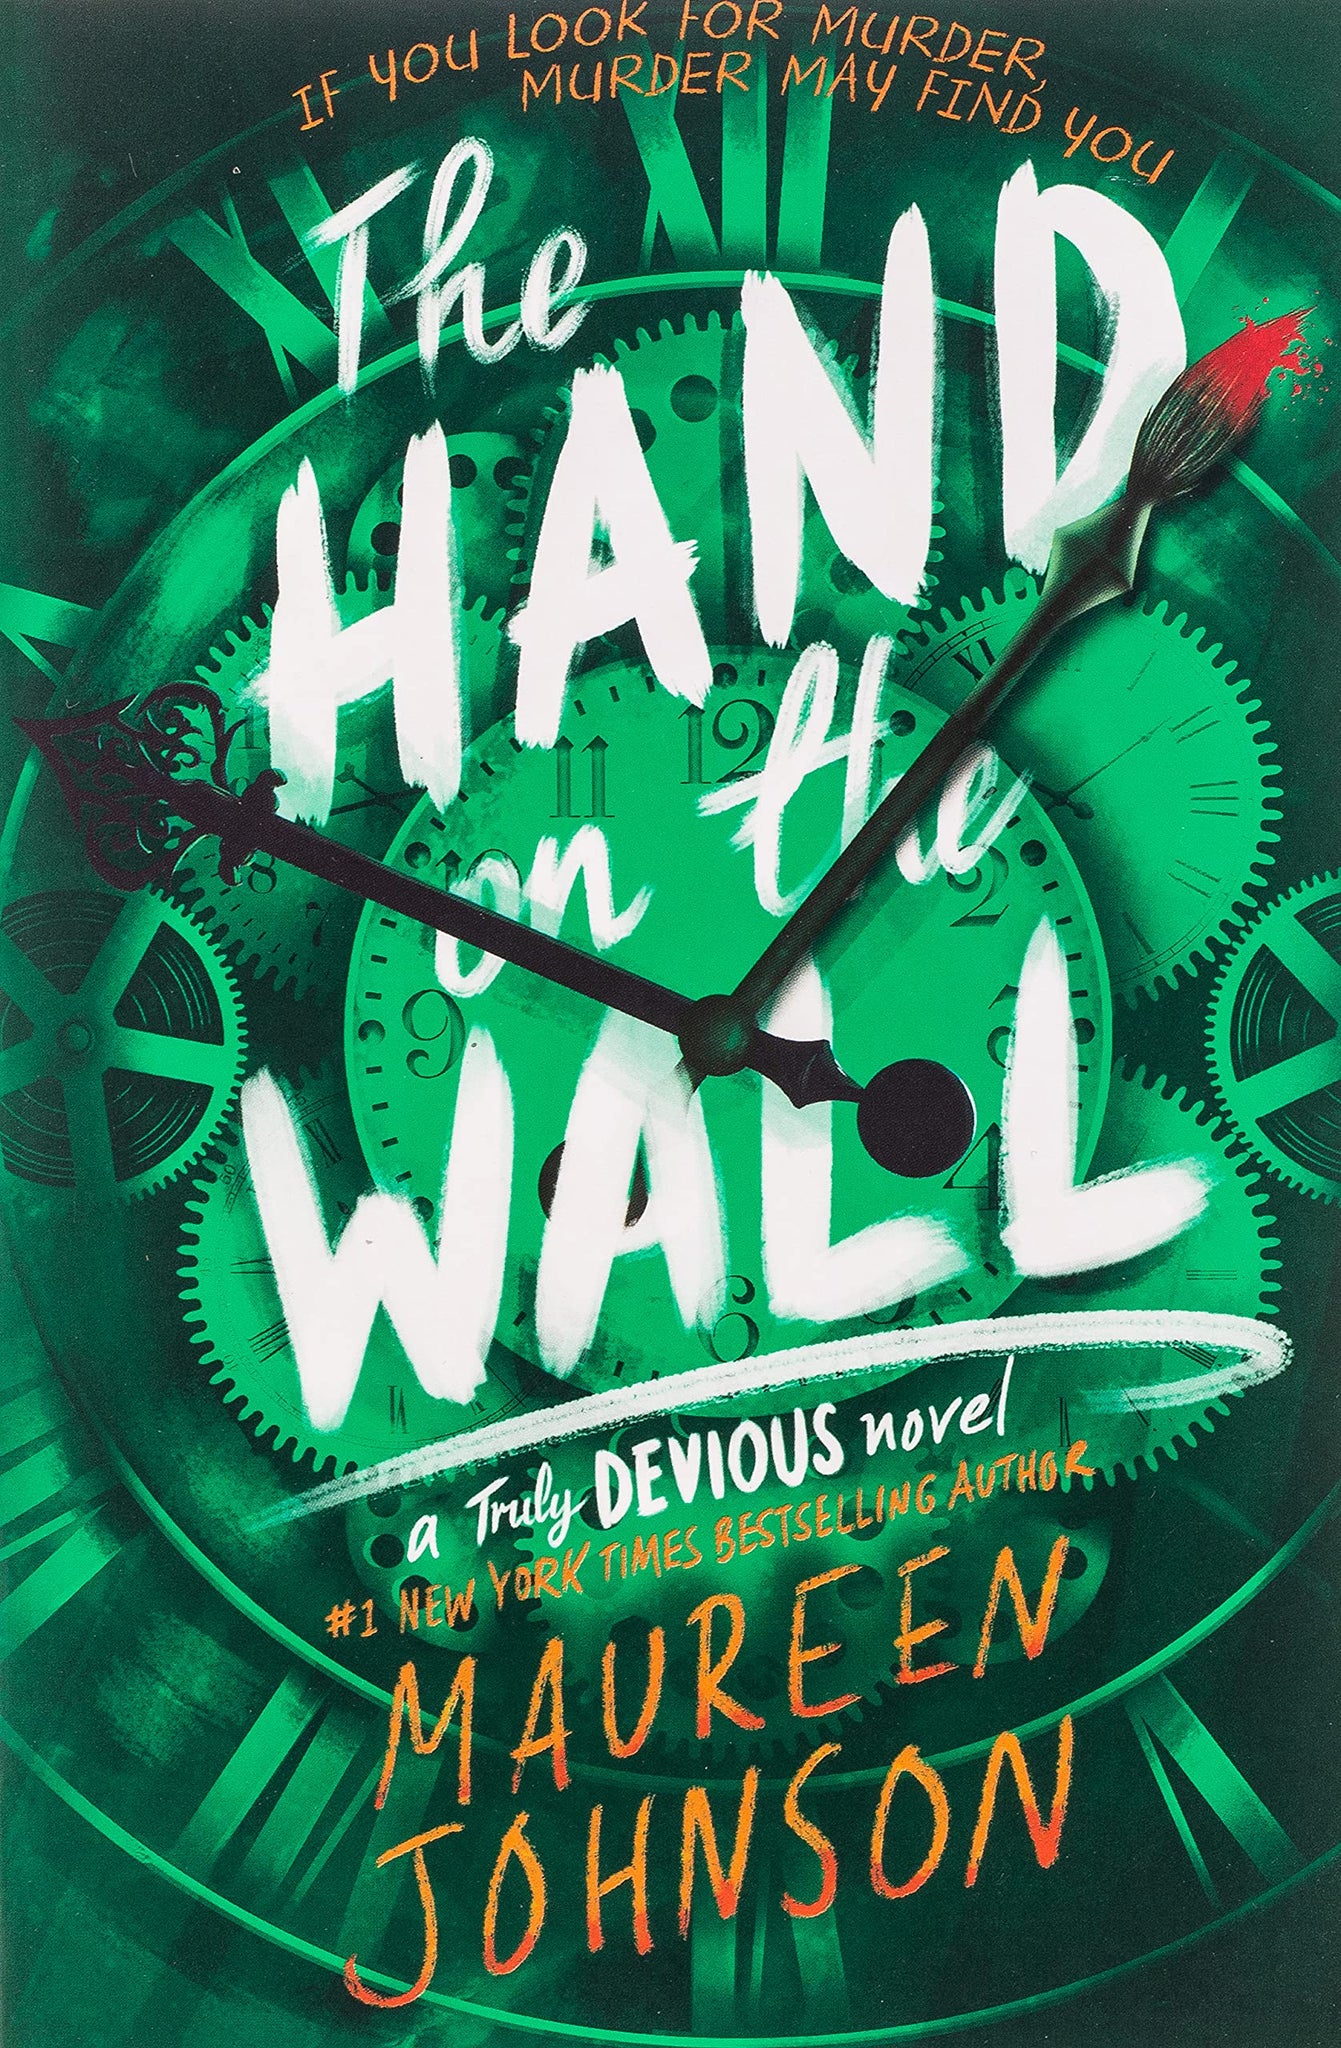 Truly Devious #3 : The Hand on the Wall by Maureen Johnson